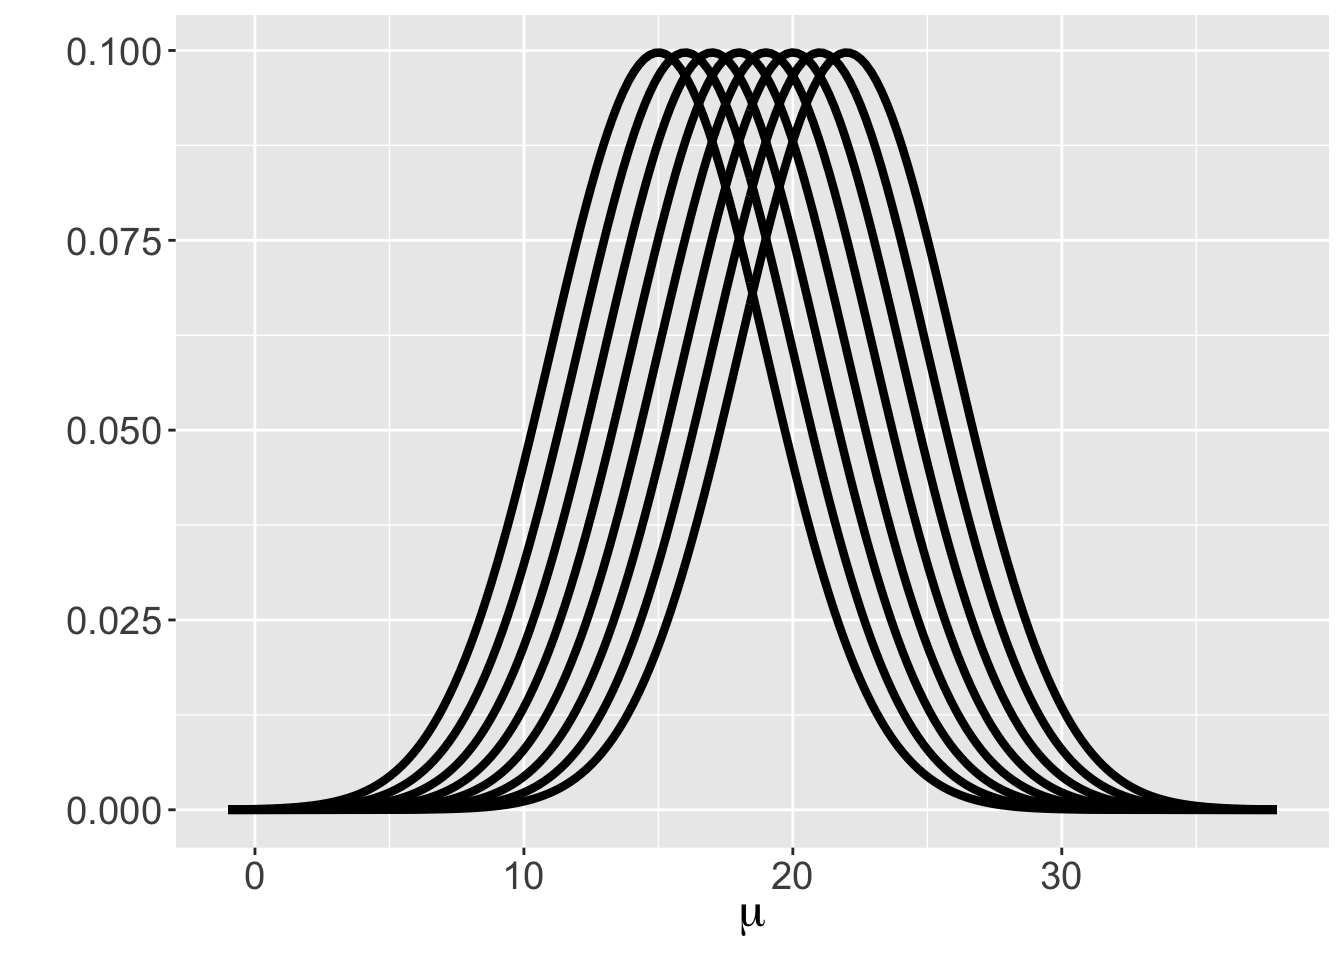 Eight possible Normal sampling curves corresponding to a discrete Uniform prior on $\mu$.